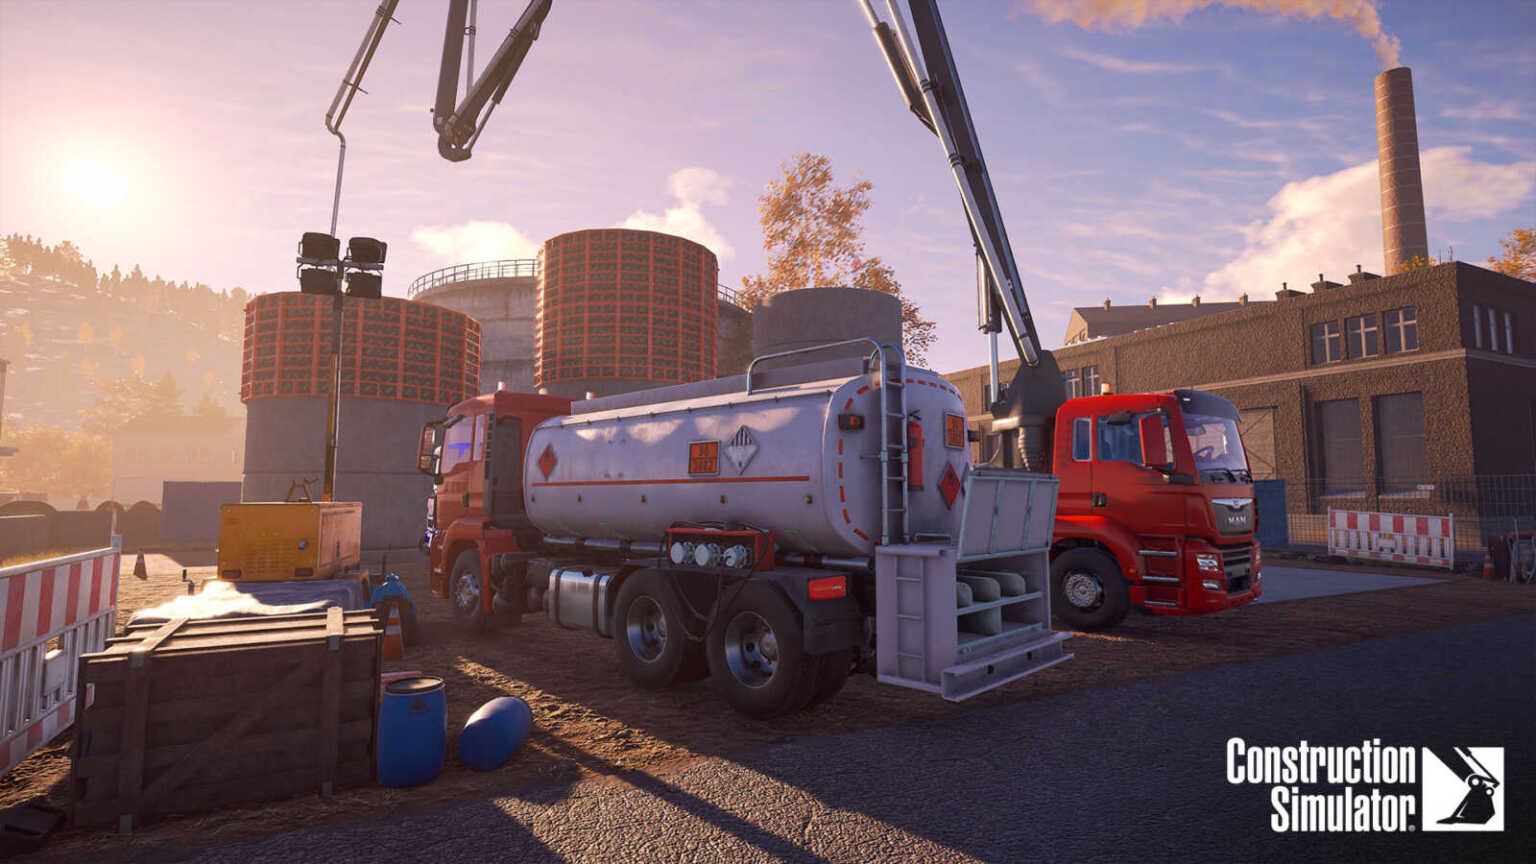 Construction Simulator: Update #8 - Service Vehicles, TrackIR, and